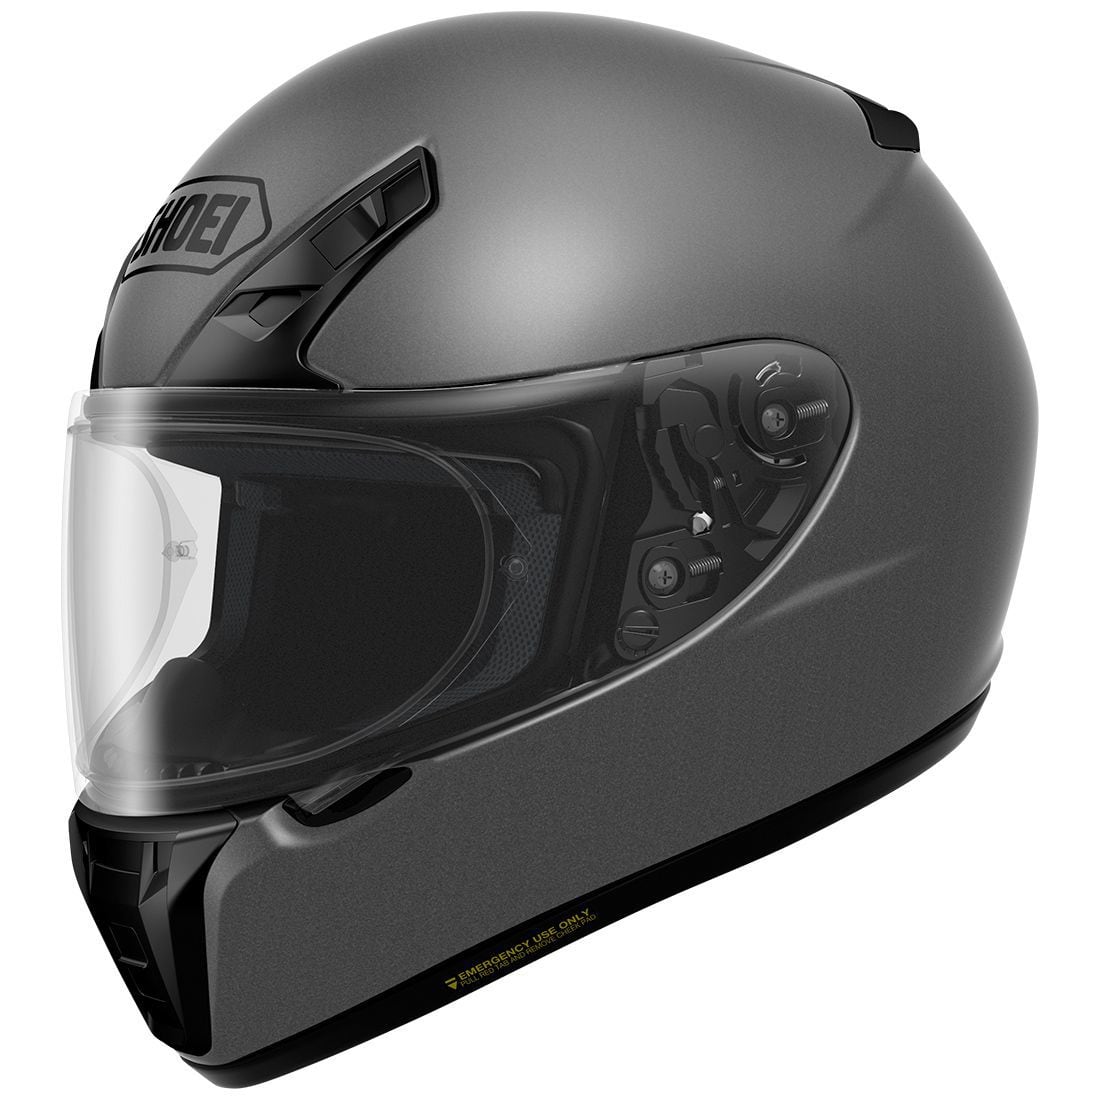 The Shoei RF-SR is a high-quality motorcycle helmet at a palatable price.